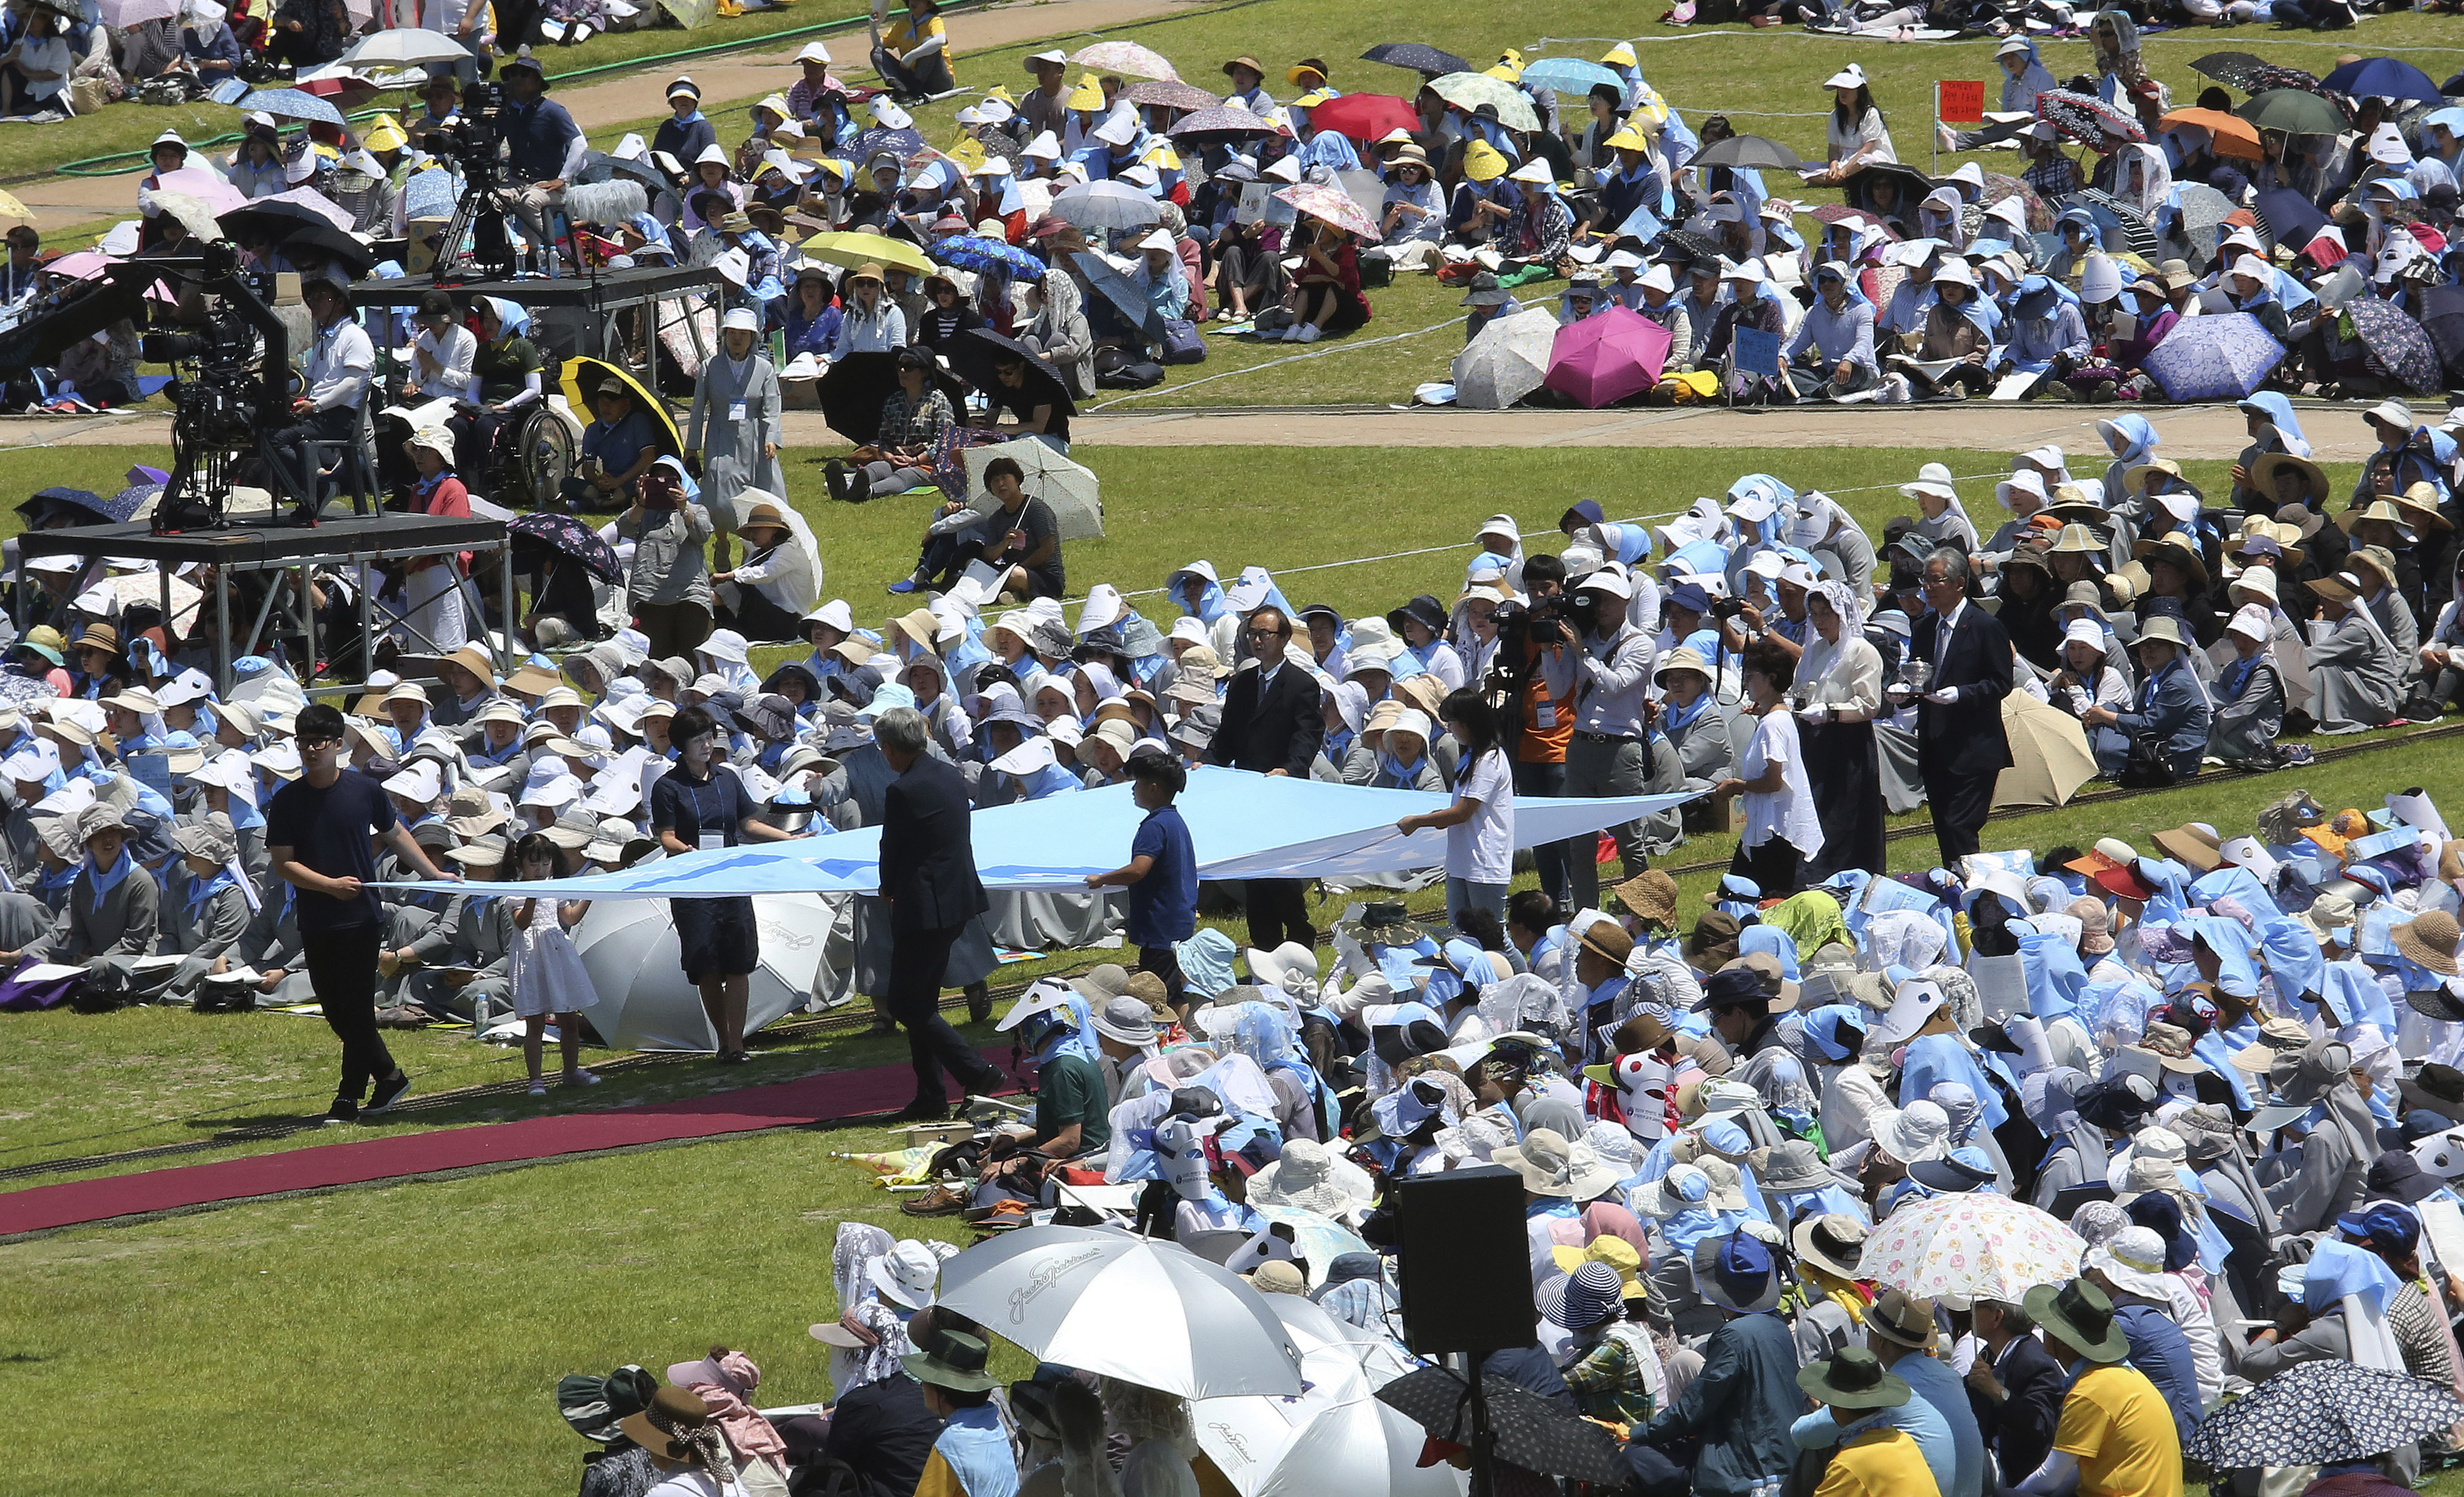 South Korean Catholic believers carry a unification flag during a service to mark the 69th anniversary of the outbreak of the Korean War at the Imjingak Pavilion, near the demilitarized zone of Panmunjom, in Paju, South Korea, Tuesday, June 25, 2019. South Korea and North Korea fought a devastating three-year war in the early 1950s that ended with an armistice, not a peace treaty. (AP Photo/Ahn Young-joon)